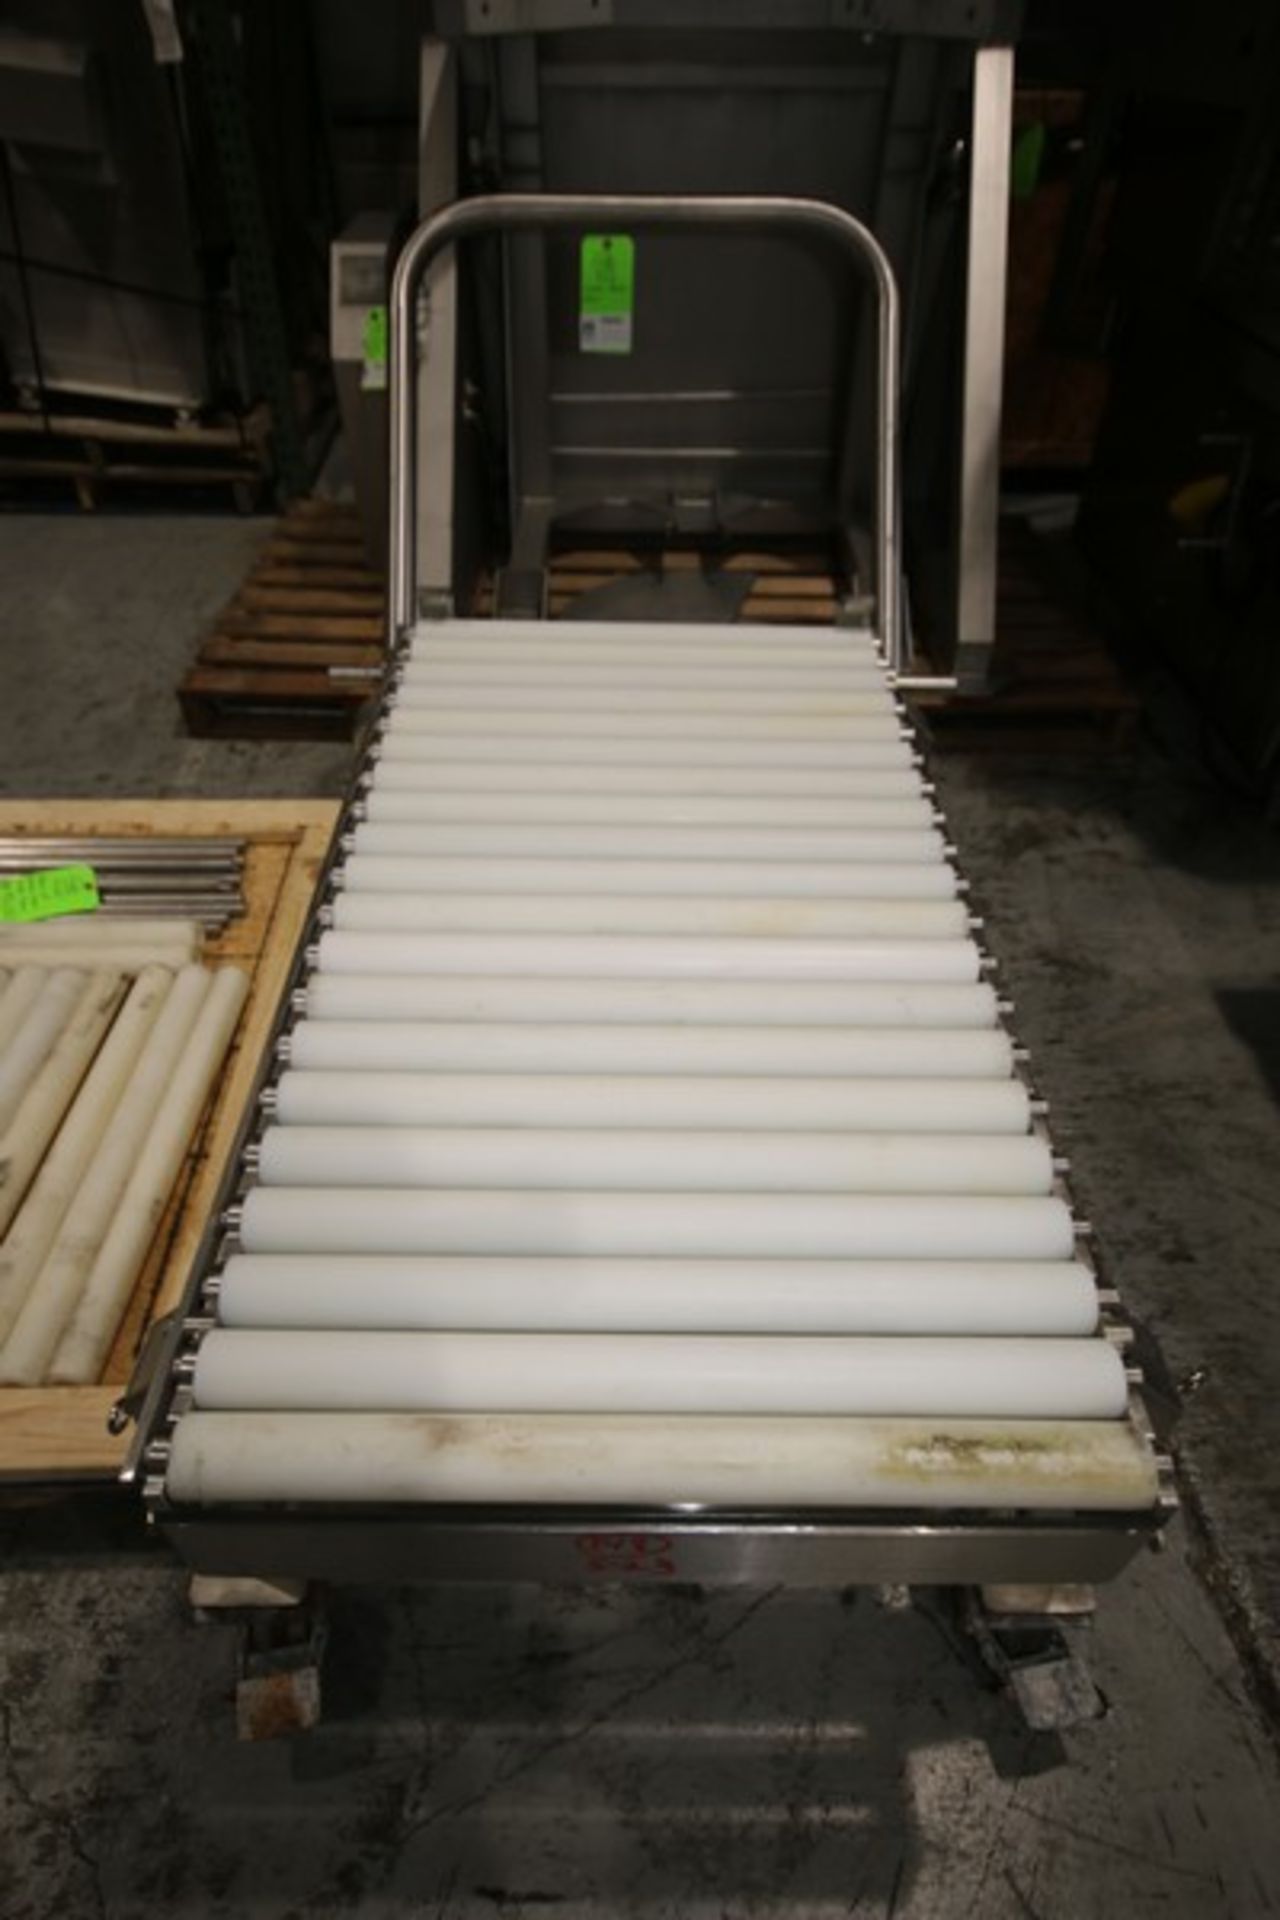 4' L x 26" W x 24" W H Portable S/S Cheese Block Conveyor, with Teflon Rollers, Includes Pallet of - Image 2 of 5